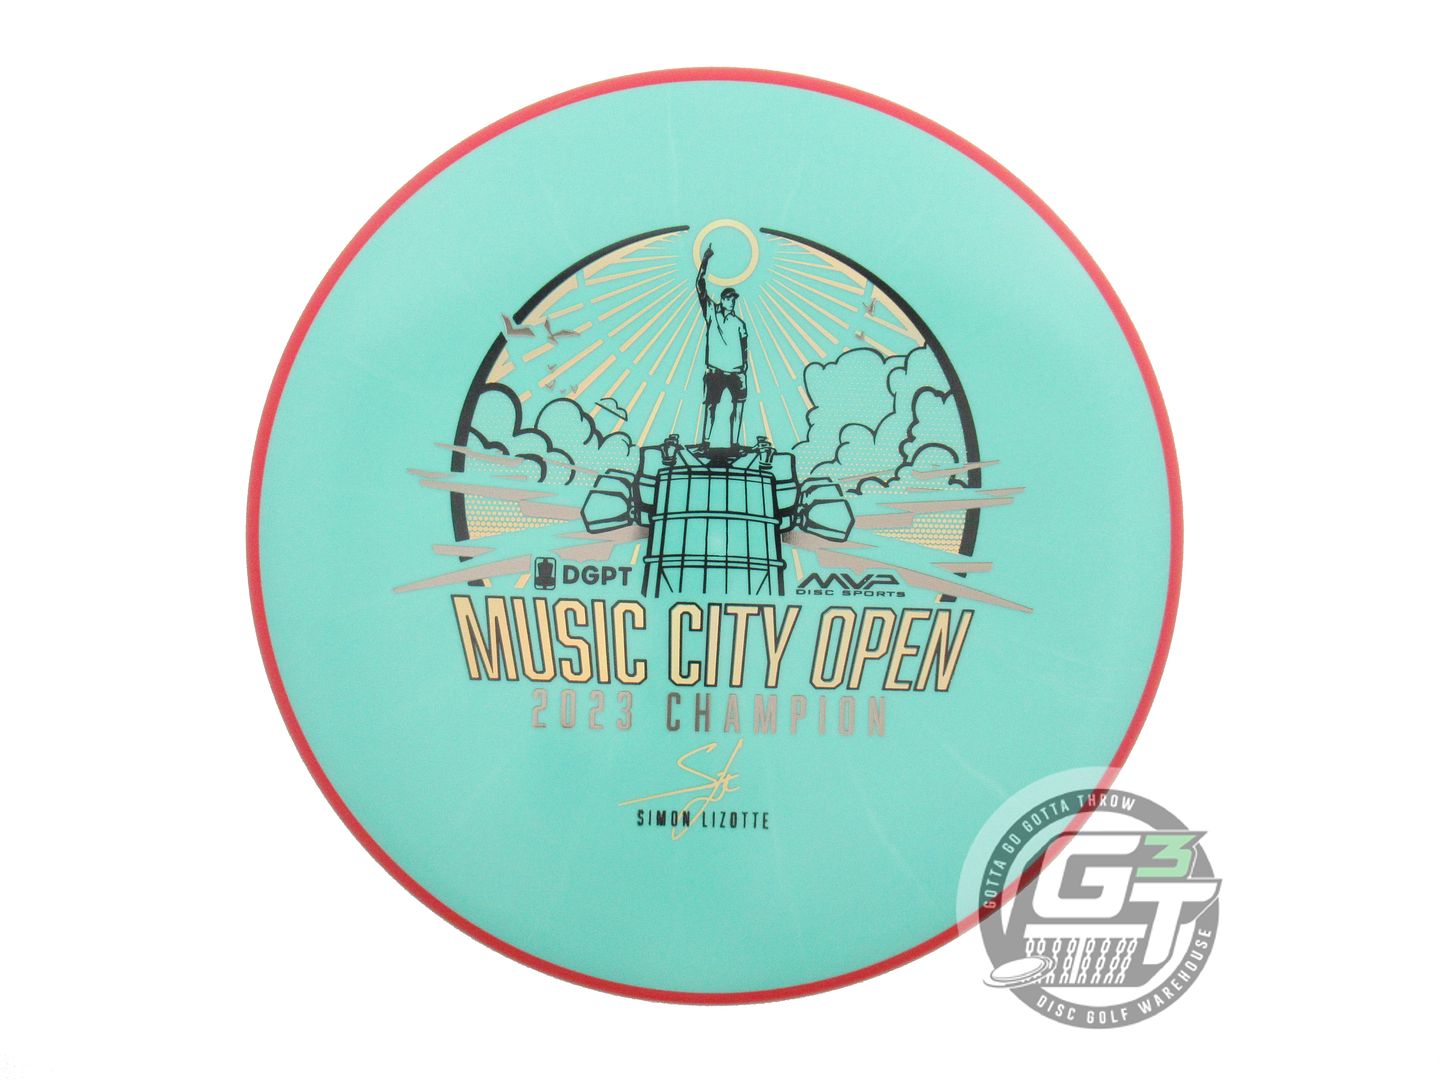 Axiom Limited Edition Simon Lizotte 2023 Music City Open Champion Edition Fission Proxy Putter Golf Disc (Individually Listed)